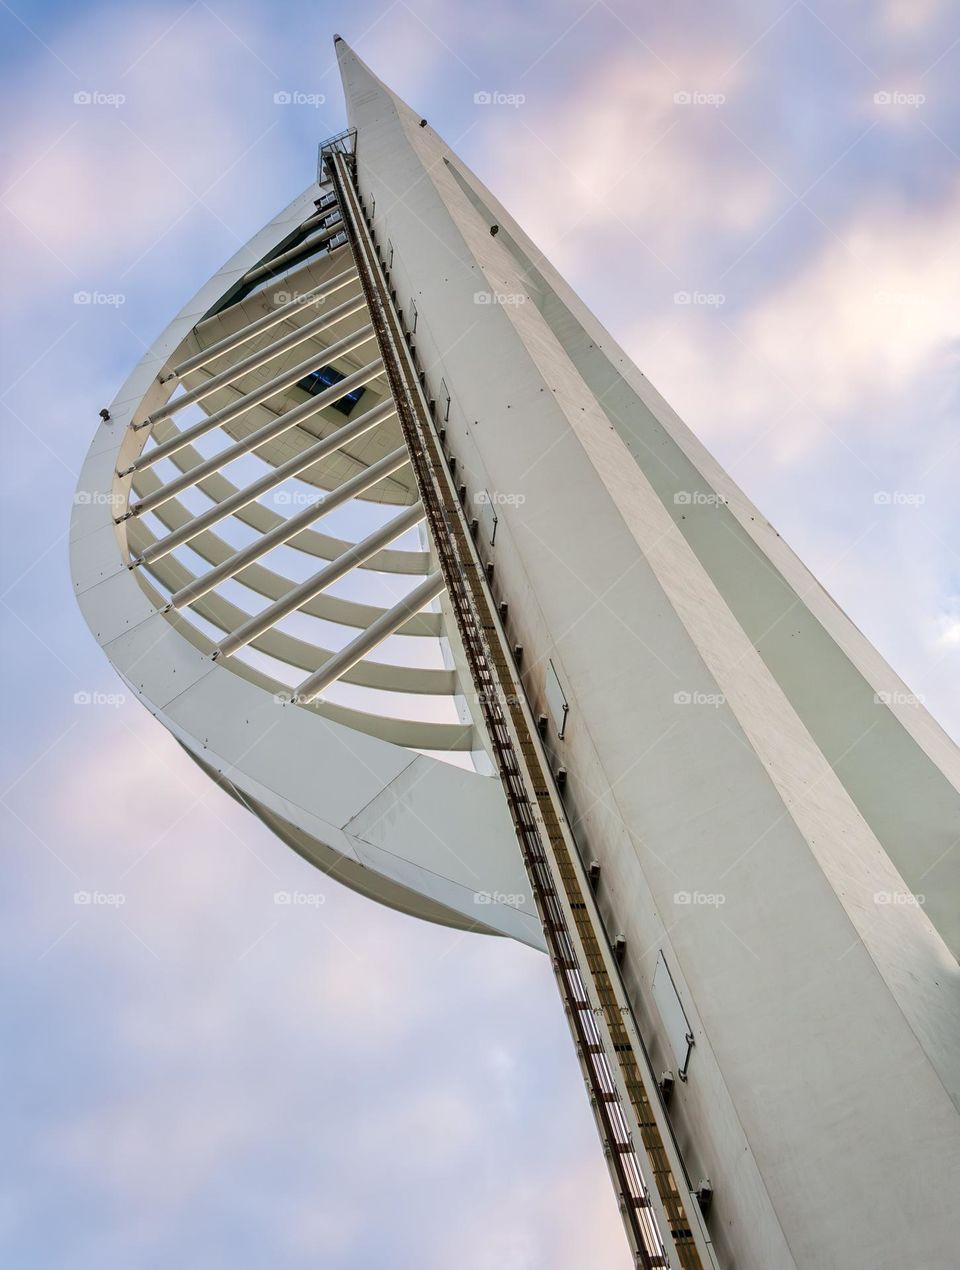 The Spinnaker Tower in Portsmouth, UK.